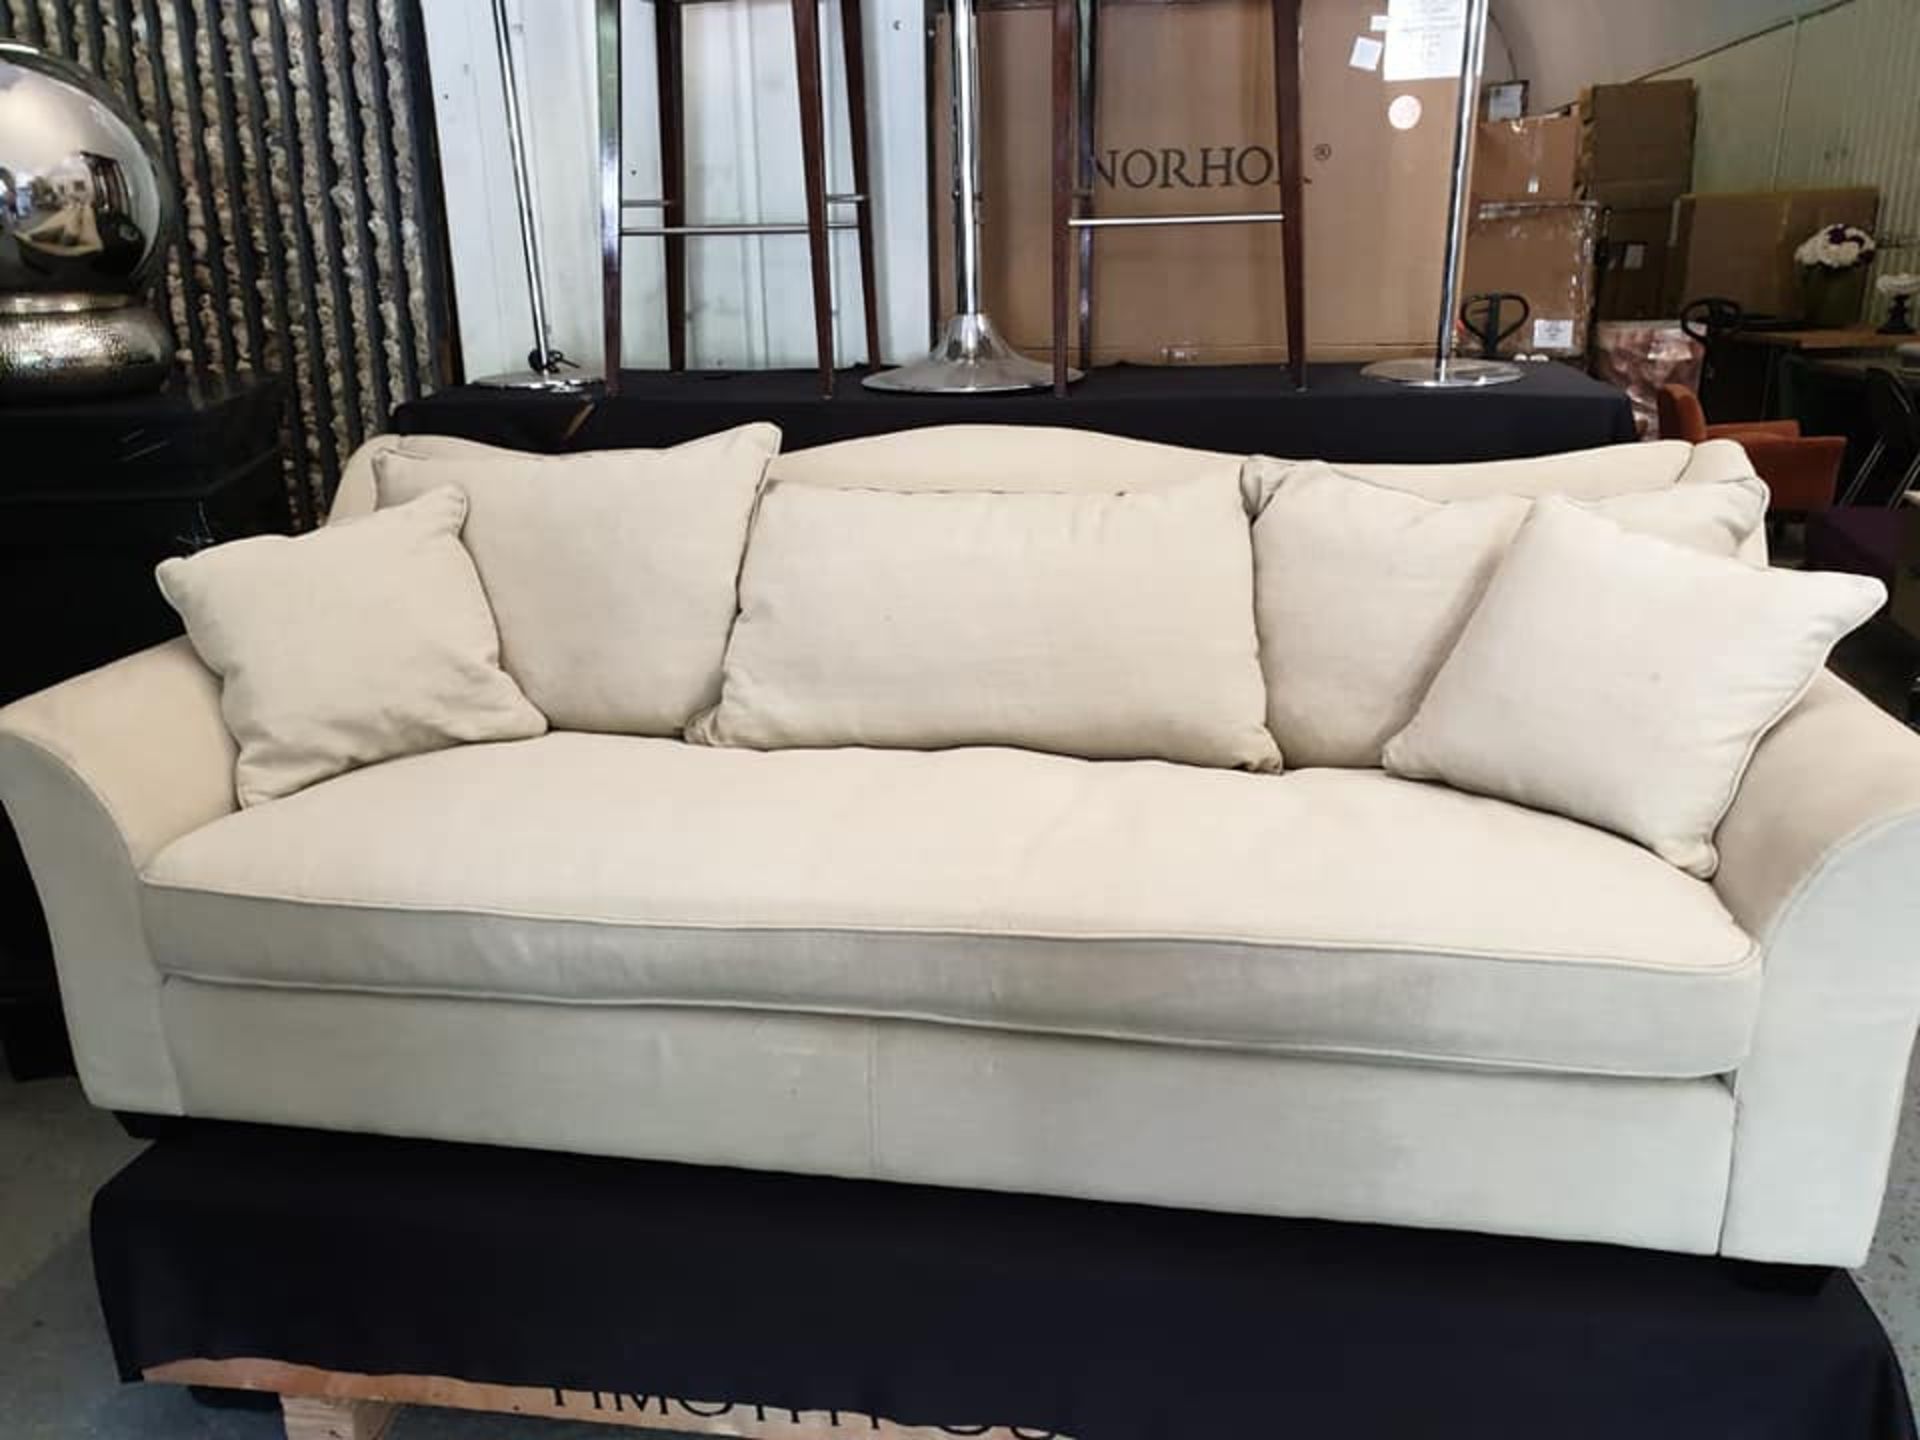 Concerto 3 Seater Upholstered Sofa Scrubbed Lime Stone A Serpentine Back Sofa With Back Loose - Image 3 of 3